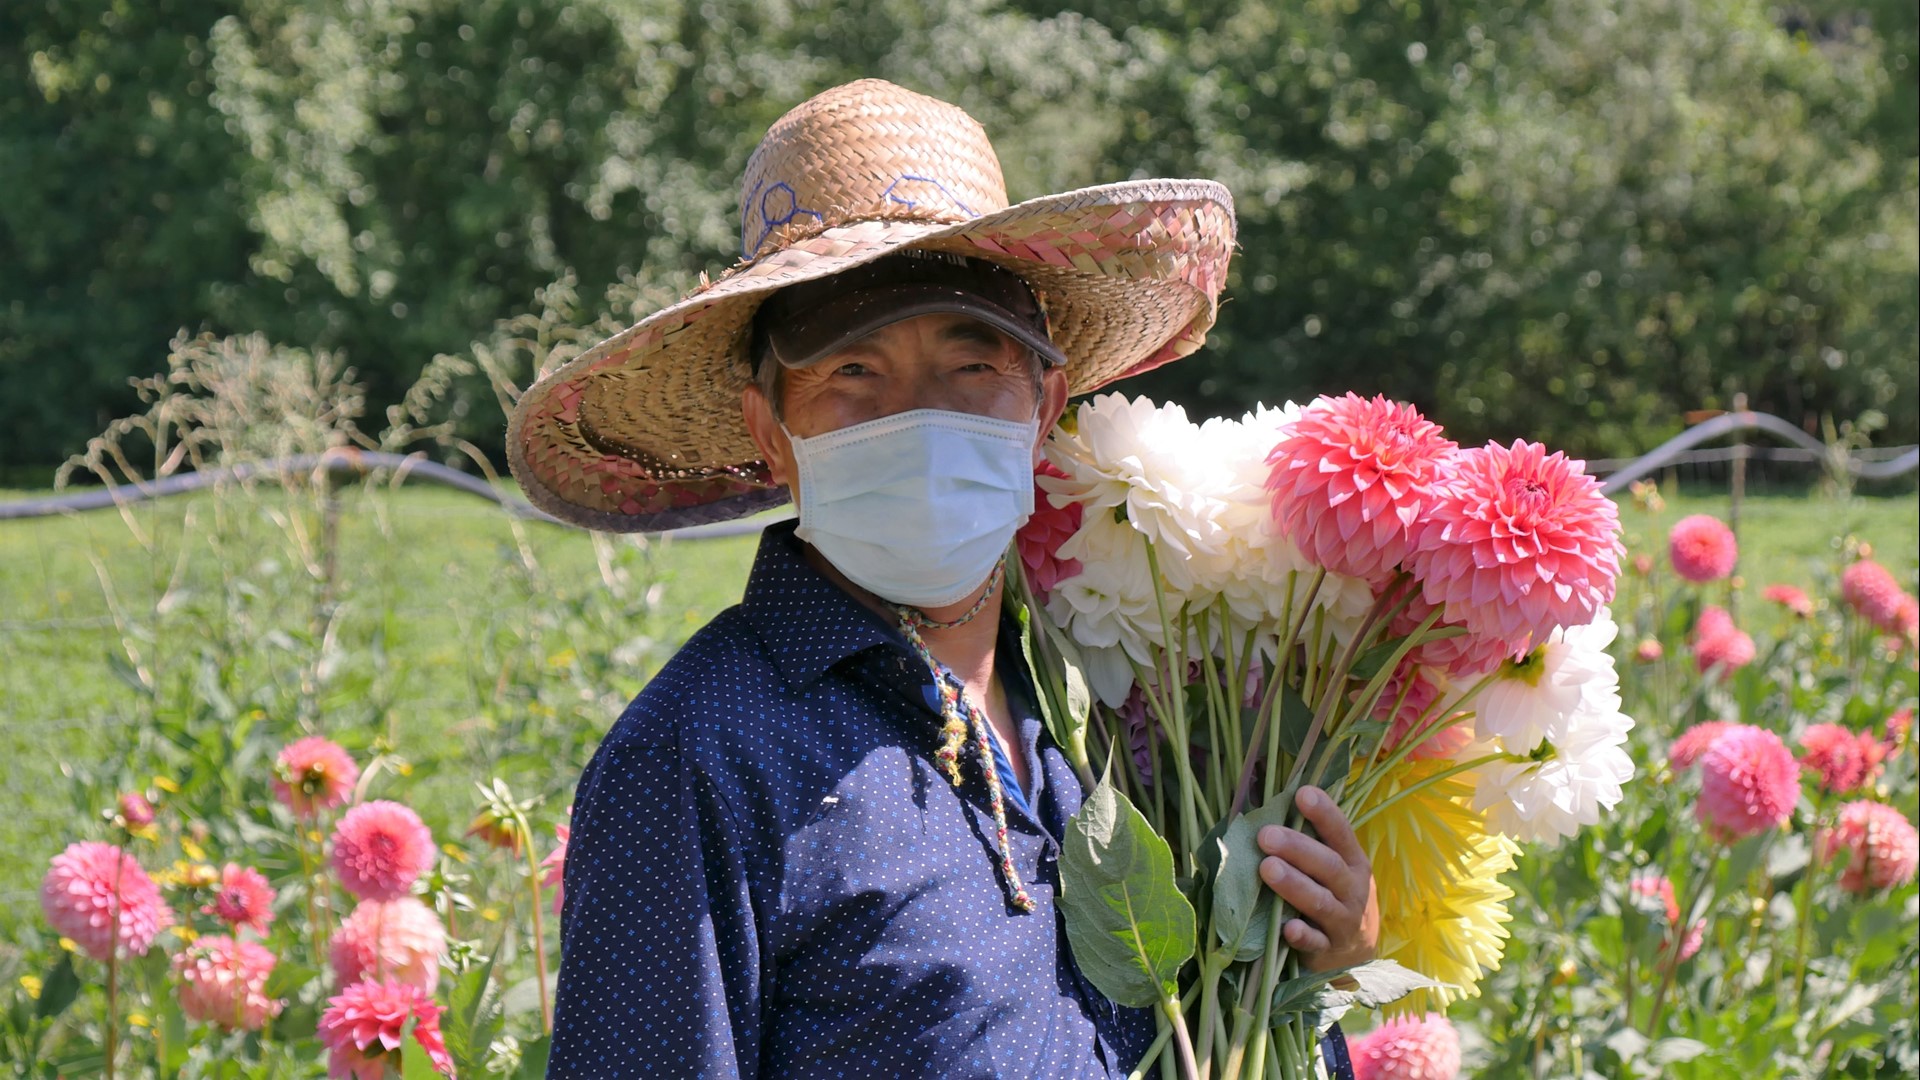 With fewer markets and fewer shoppers, the Hmong farmers behind the iconic flower bouquets are hurting - but thanks to a woman in Lake City, there's a way to help.